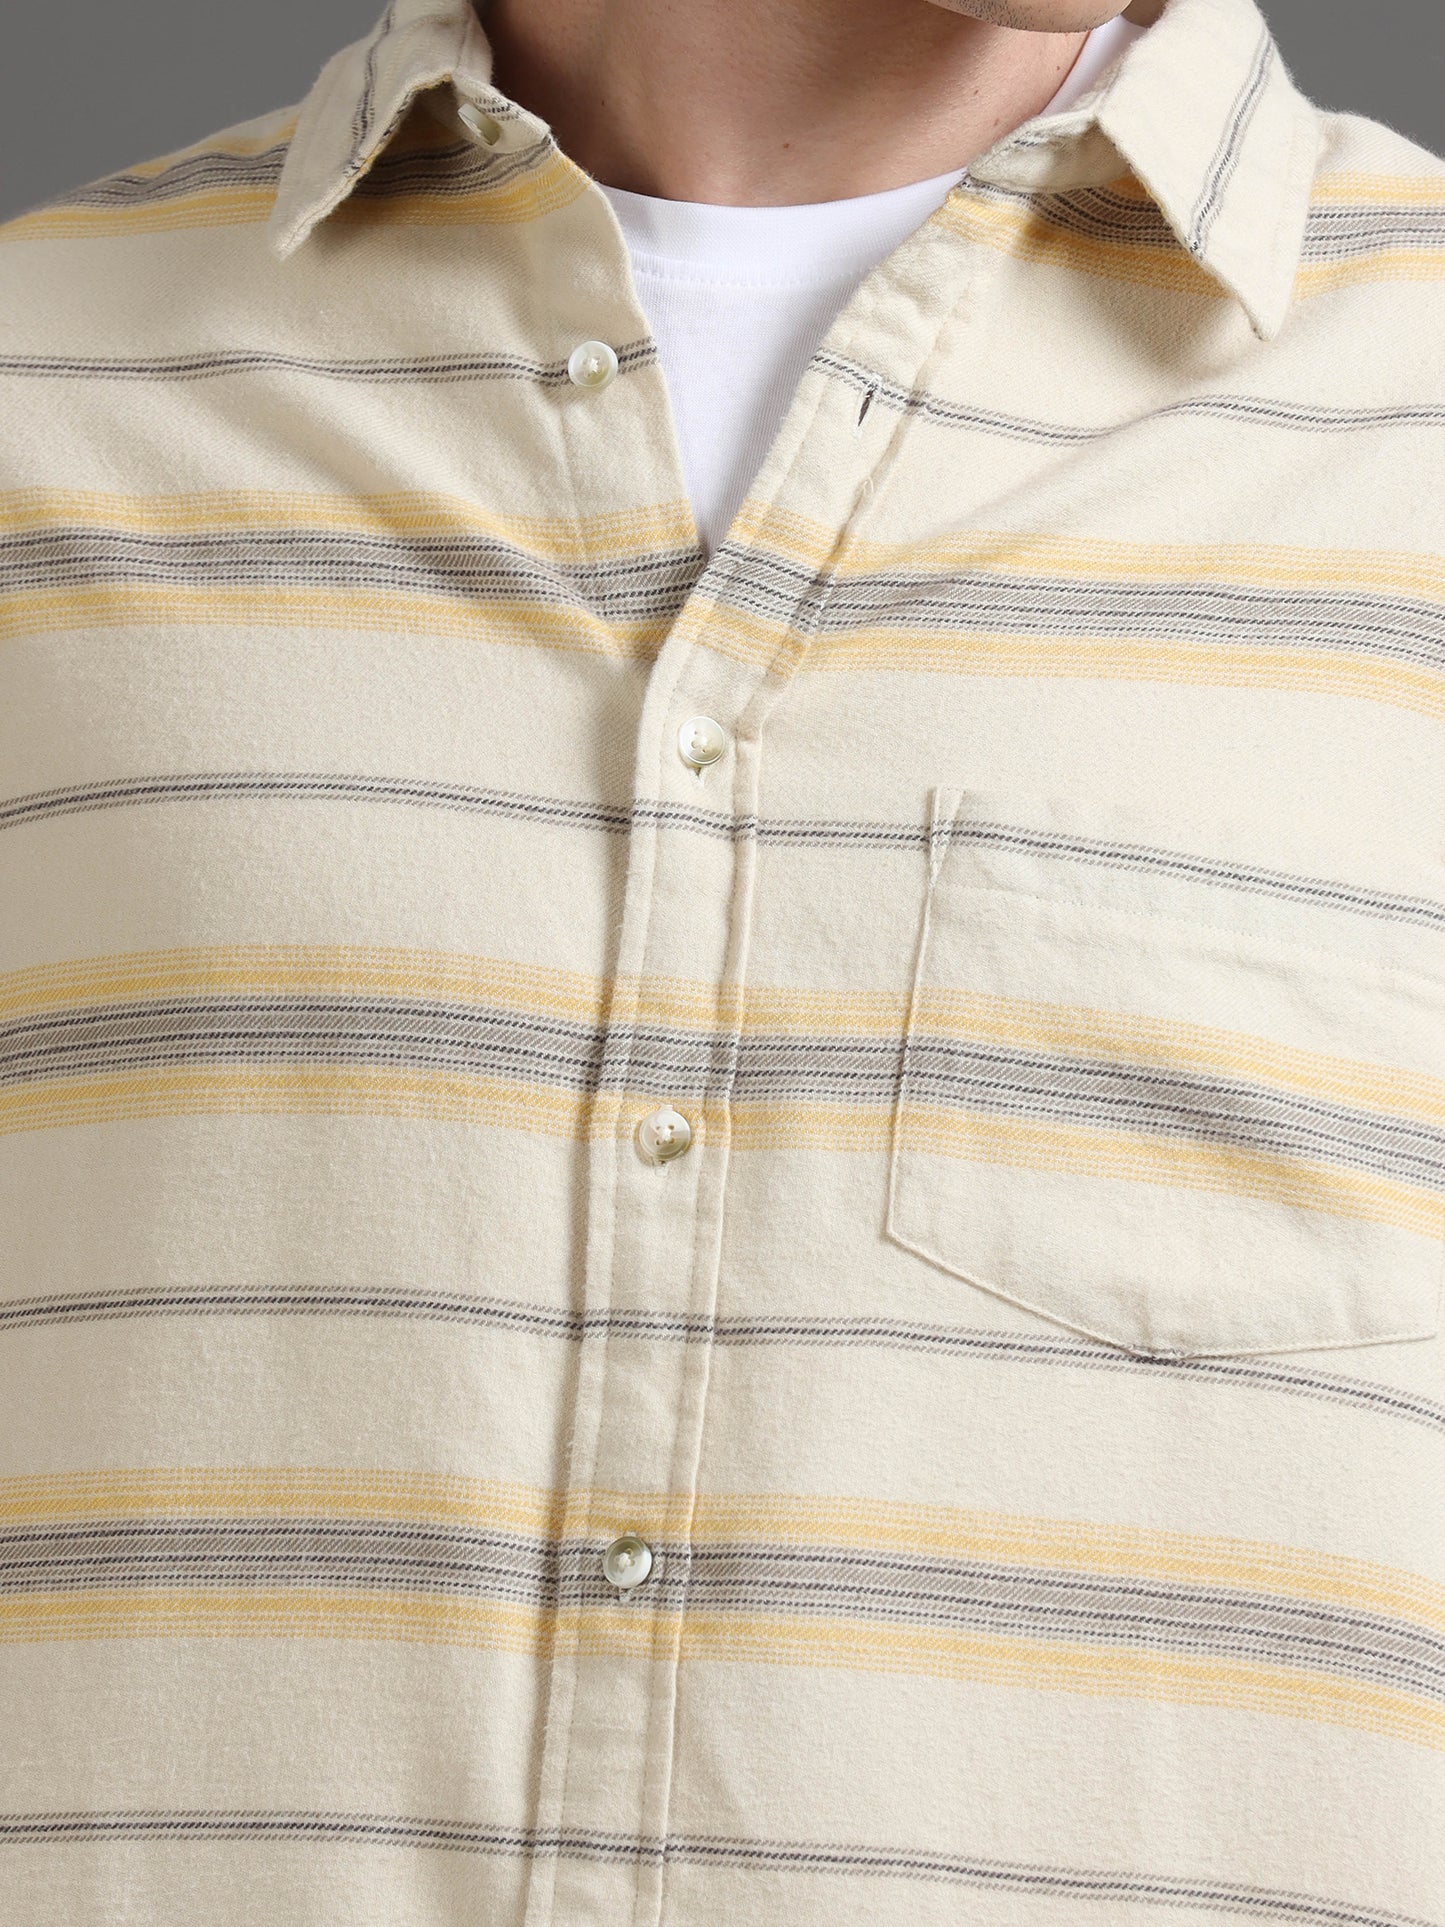 Premium Men Shirt, Relaxed Fit, Yarn Dyed Stripes, Pure Cotton, Full Sleeve, Beige